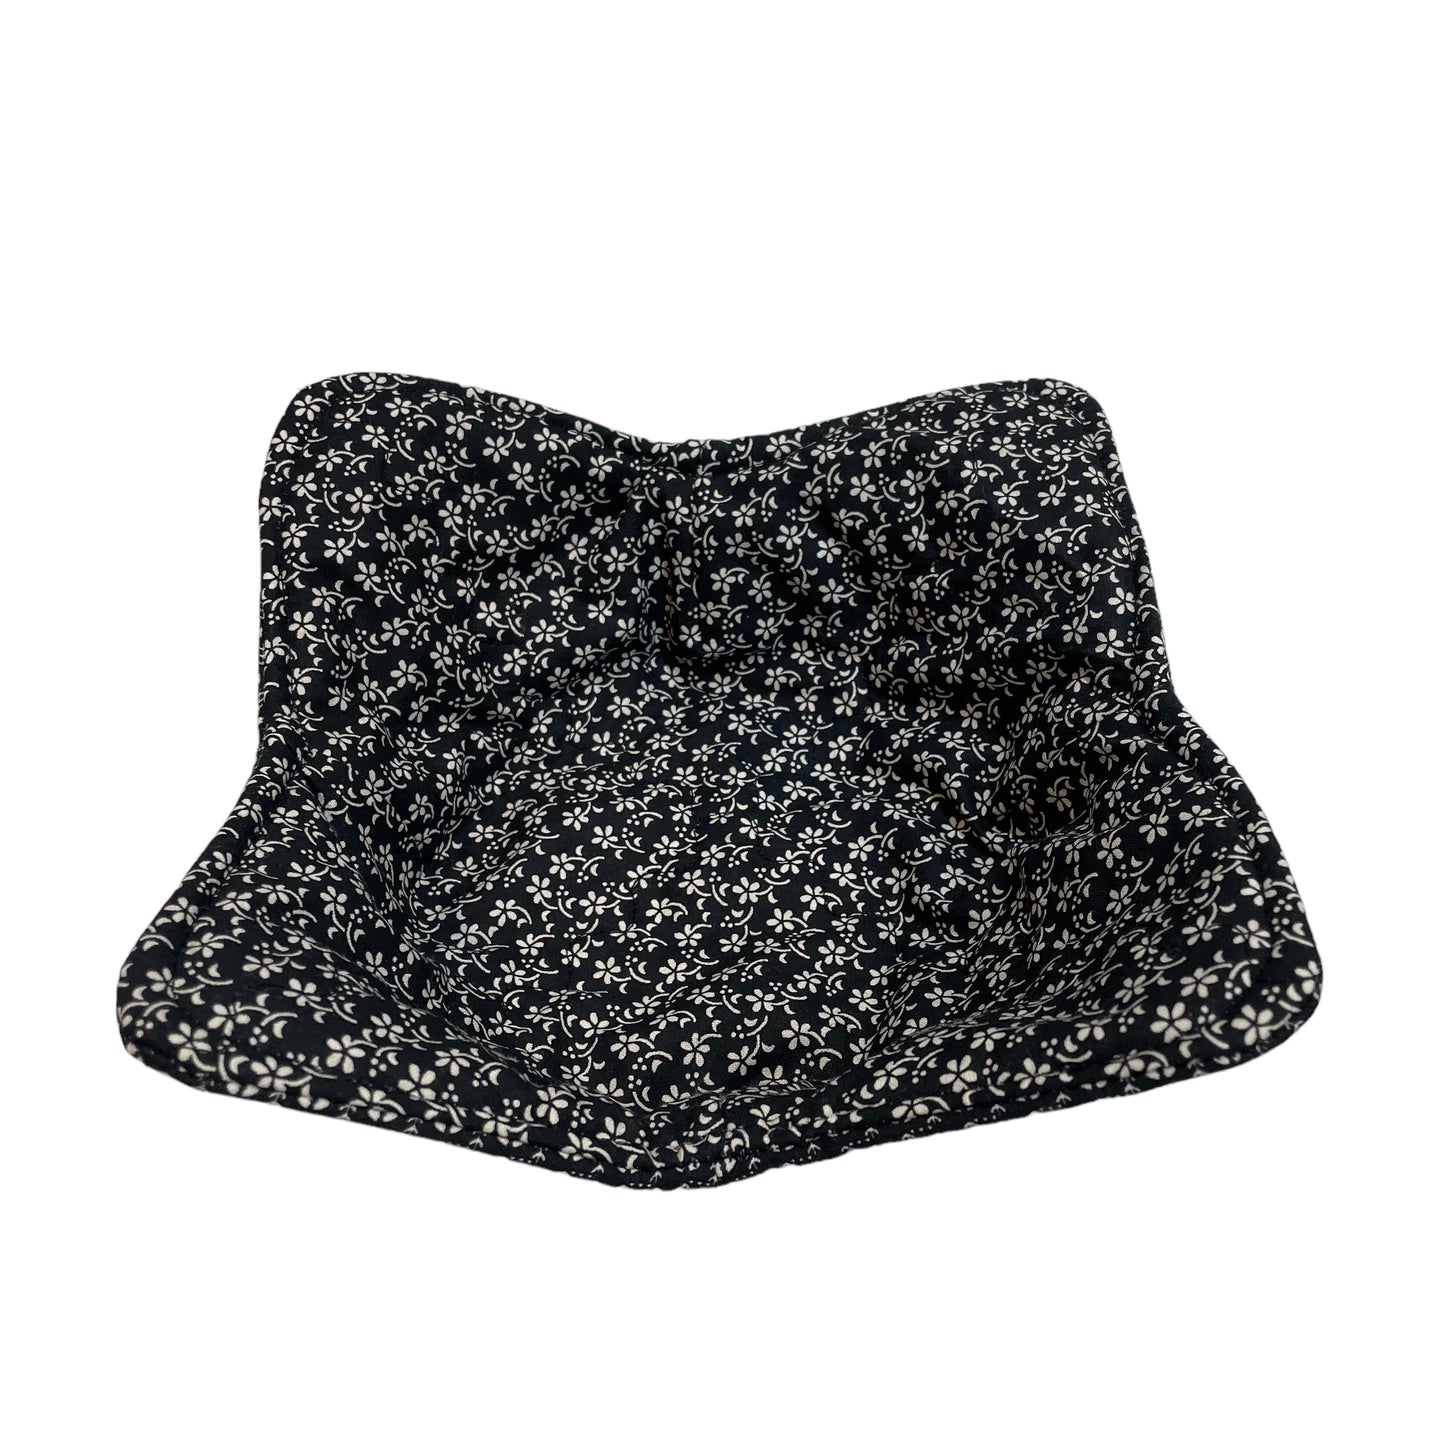 Black and Cream Reversible Soup Bowl Cozy